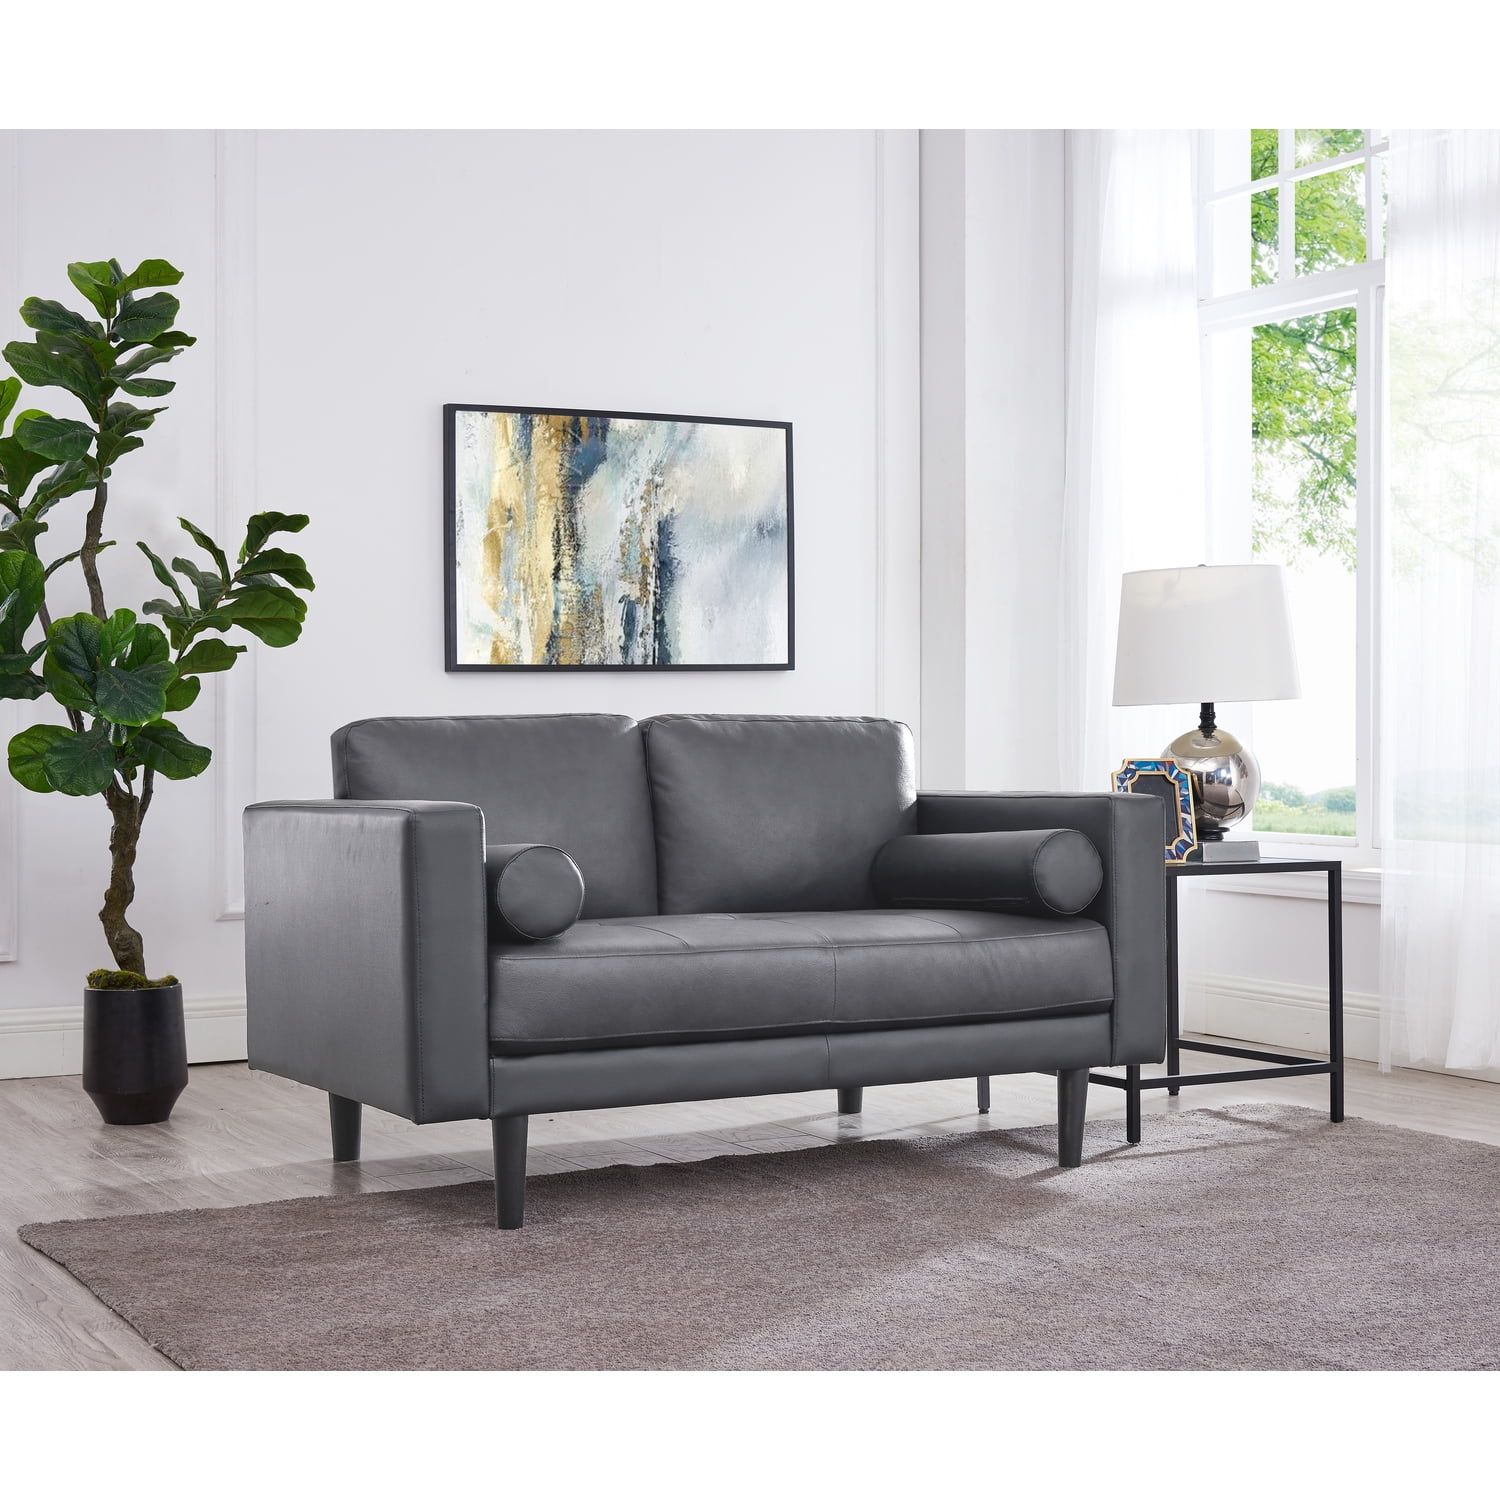 Modern Top Grain Leather Loveseat In Gray, Loveseat Sofa Couch For Bedroom,  Living Room Furniture, Space Saving 2 Seater Couch For Living Room,  Bedroom, Apartment, Small Spaces, Gray – Walmart Inside Top Grain Leather Loveseats (Photo 7 of 15)